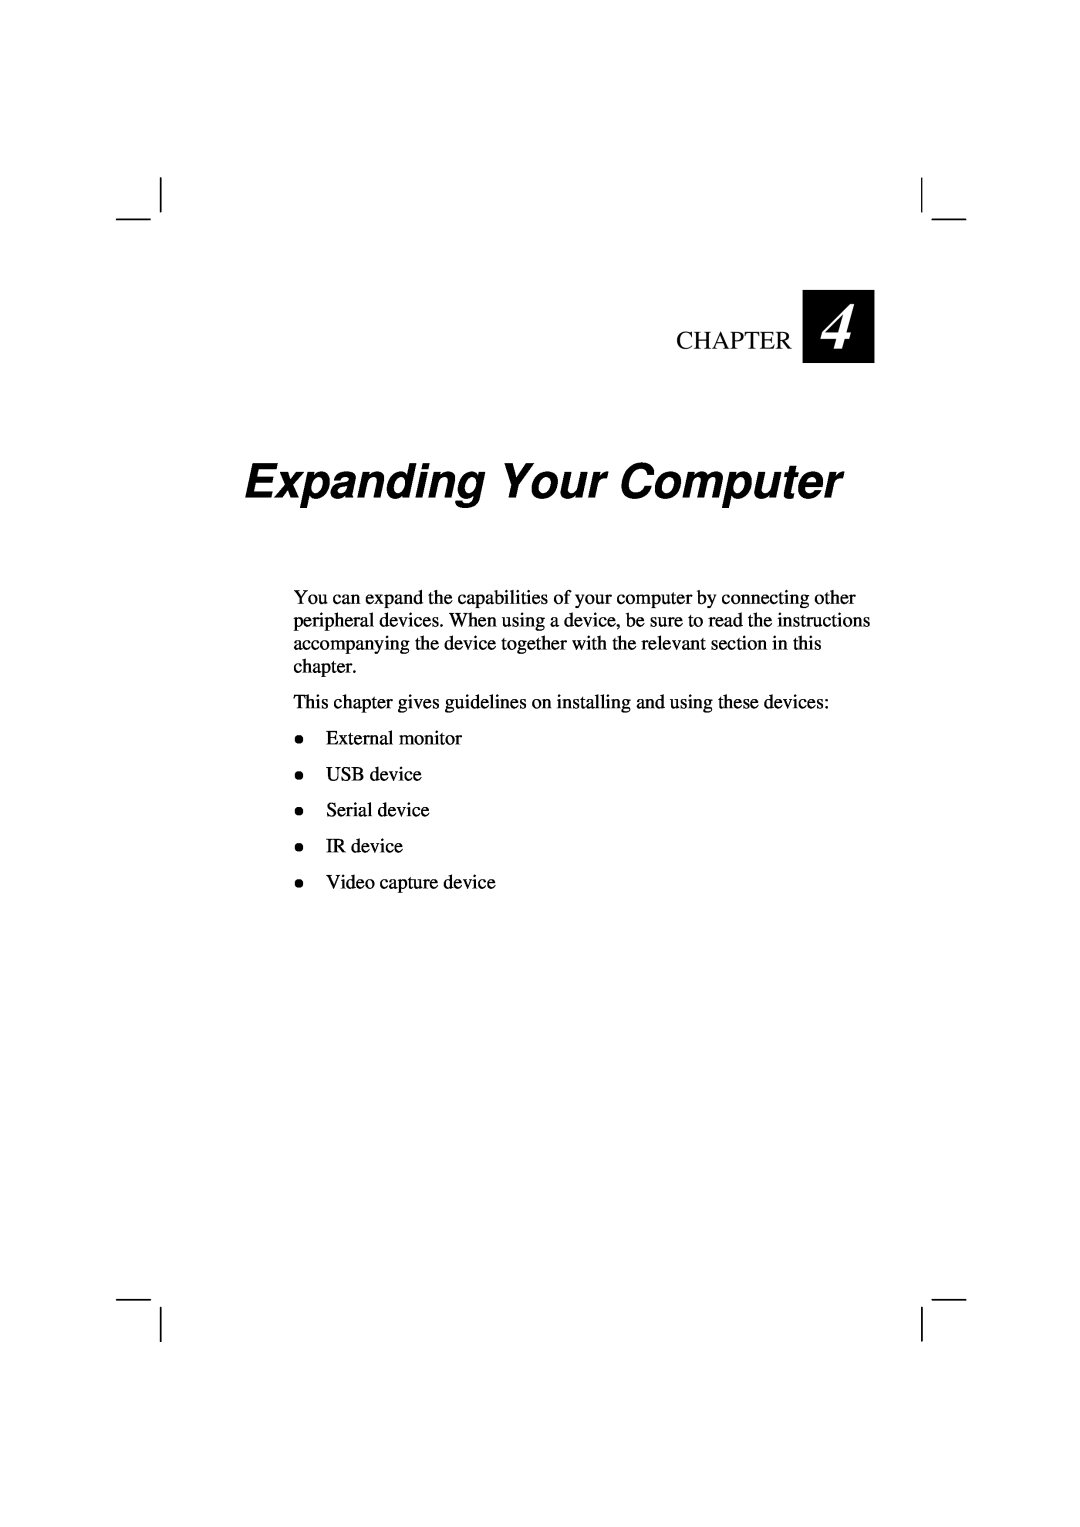 Casio HK1223 Expanding Your Computer, Chapter, This chapter gives guidelines on installing and using these devices 